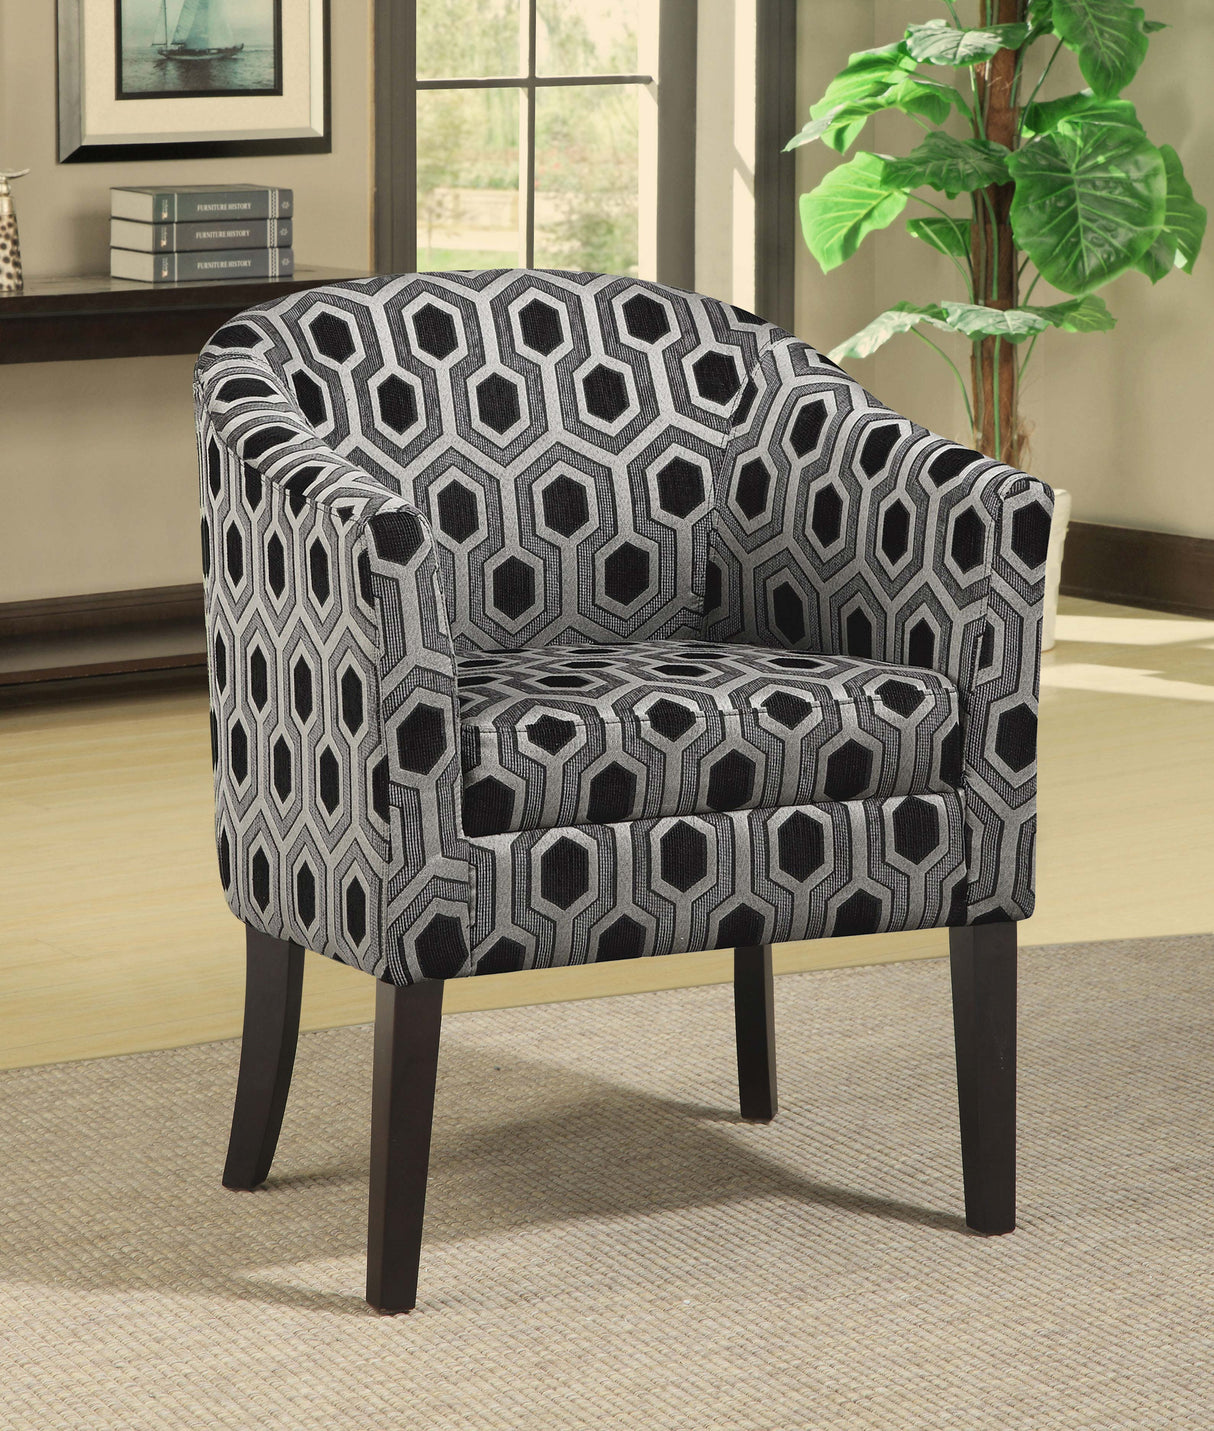 Accent Chair - Jansen Hexagon Patterned Accent Chair Grey and Black